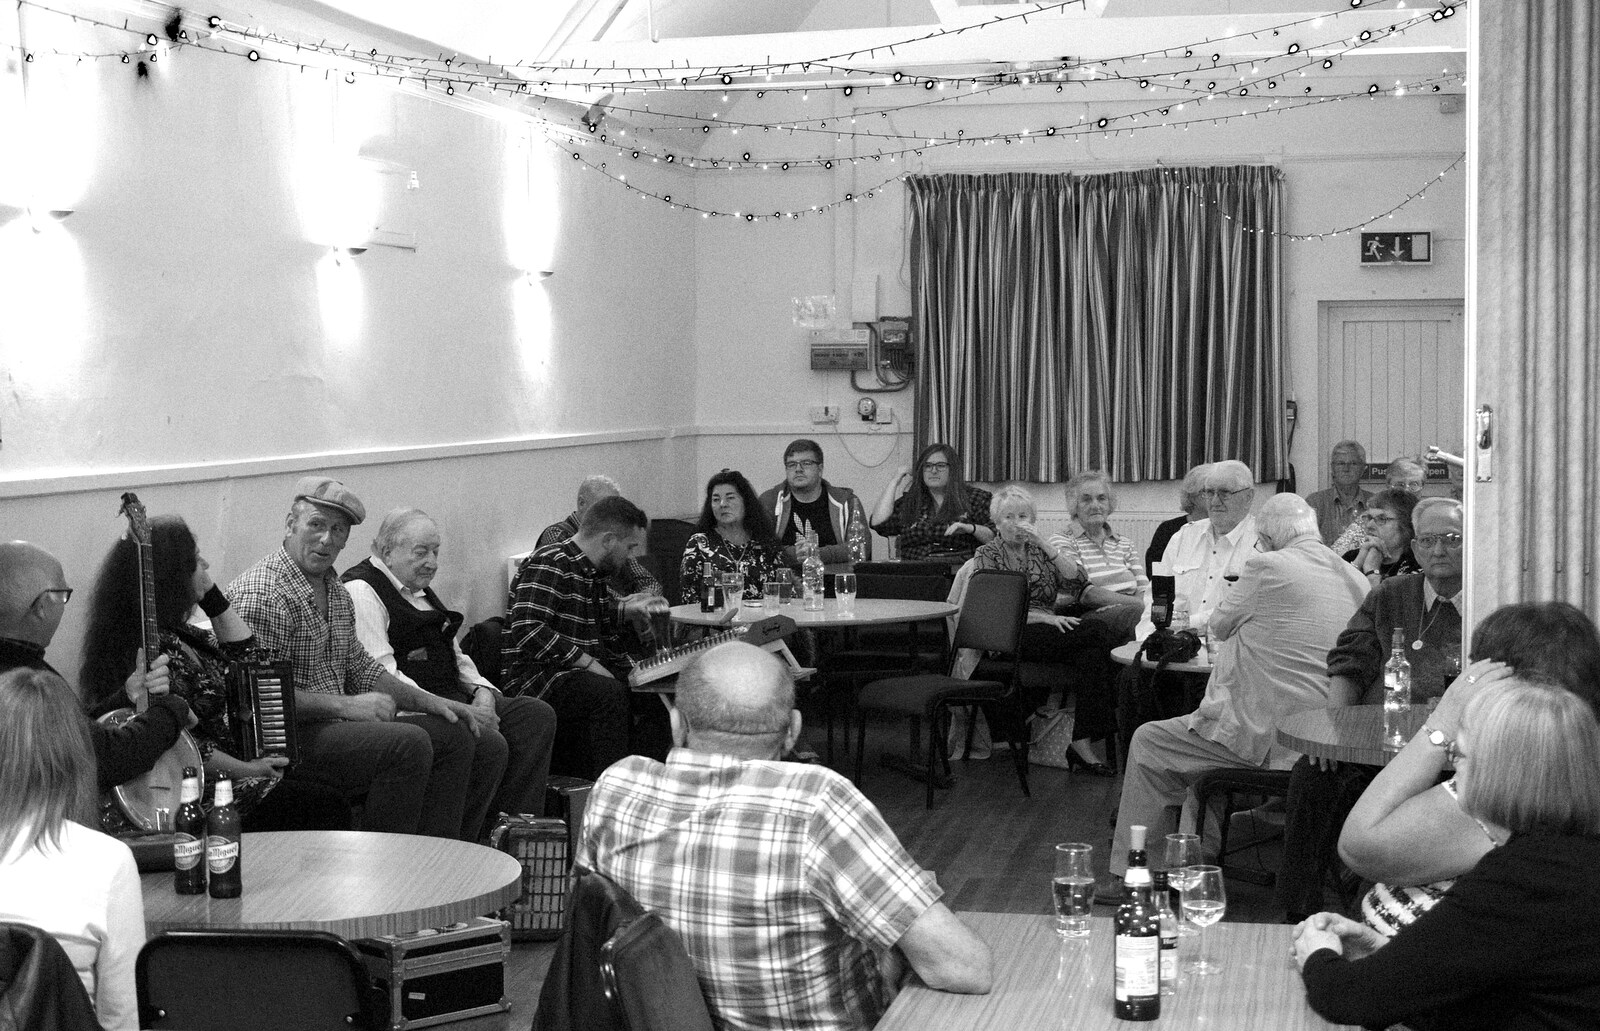 There's a good turnout up the village hall from Big Steve's Music Night, The Village Hall, Brome, Suffolk - 6th October 2018